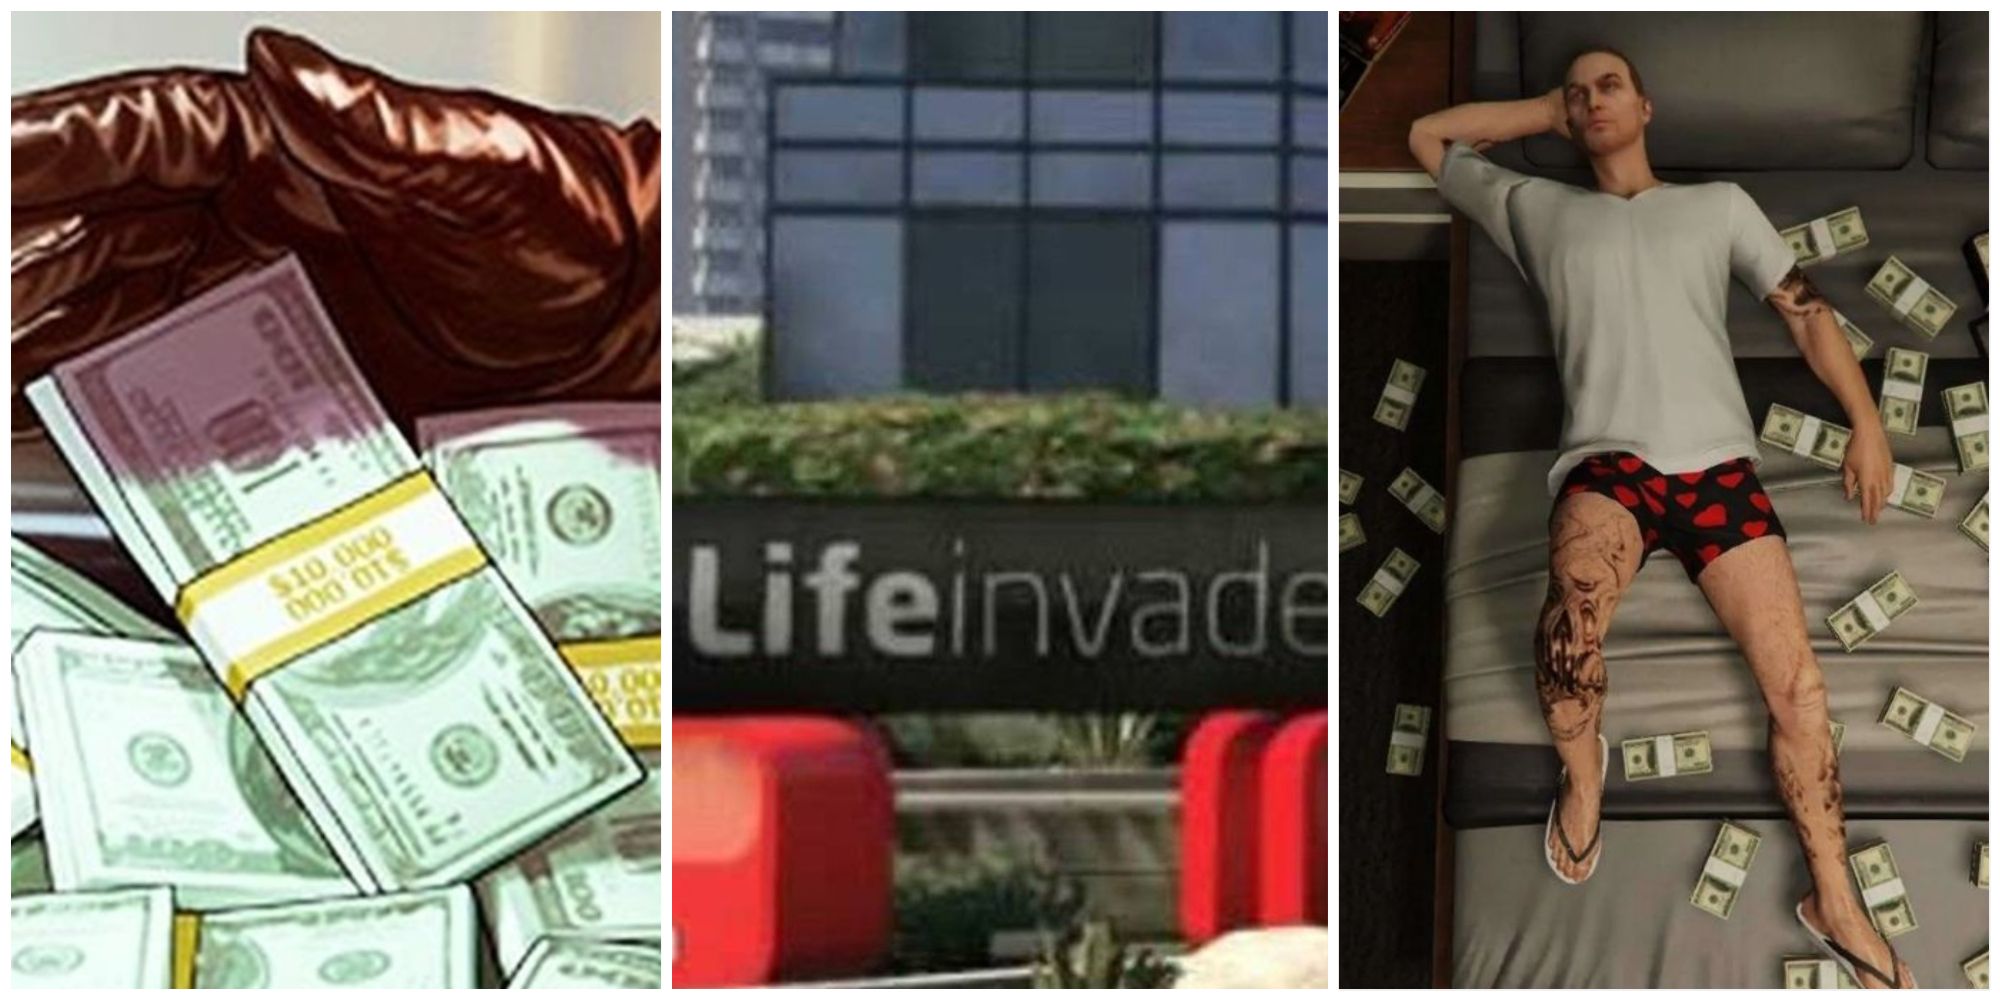 Grand Theft Auto 5 split image of cash, the lifeinvader logo, and a man surrounded by cash